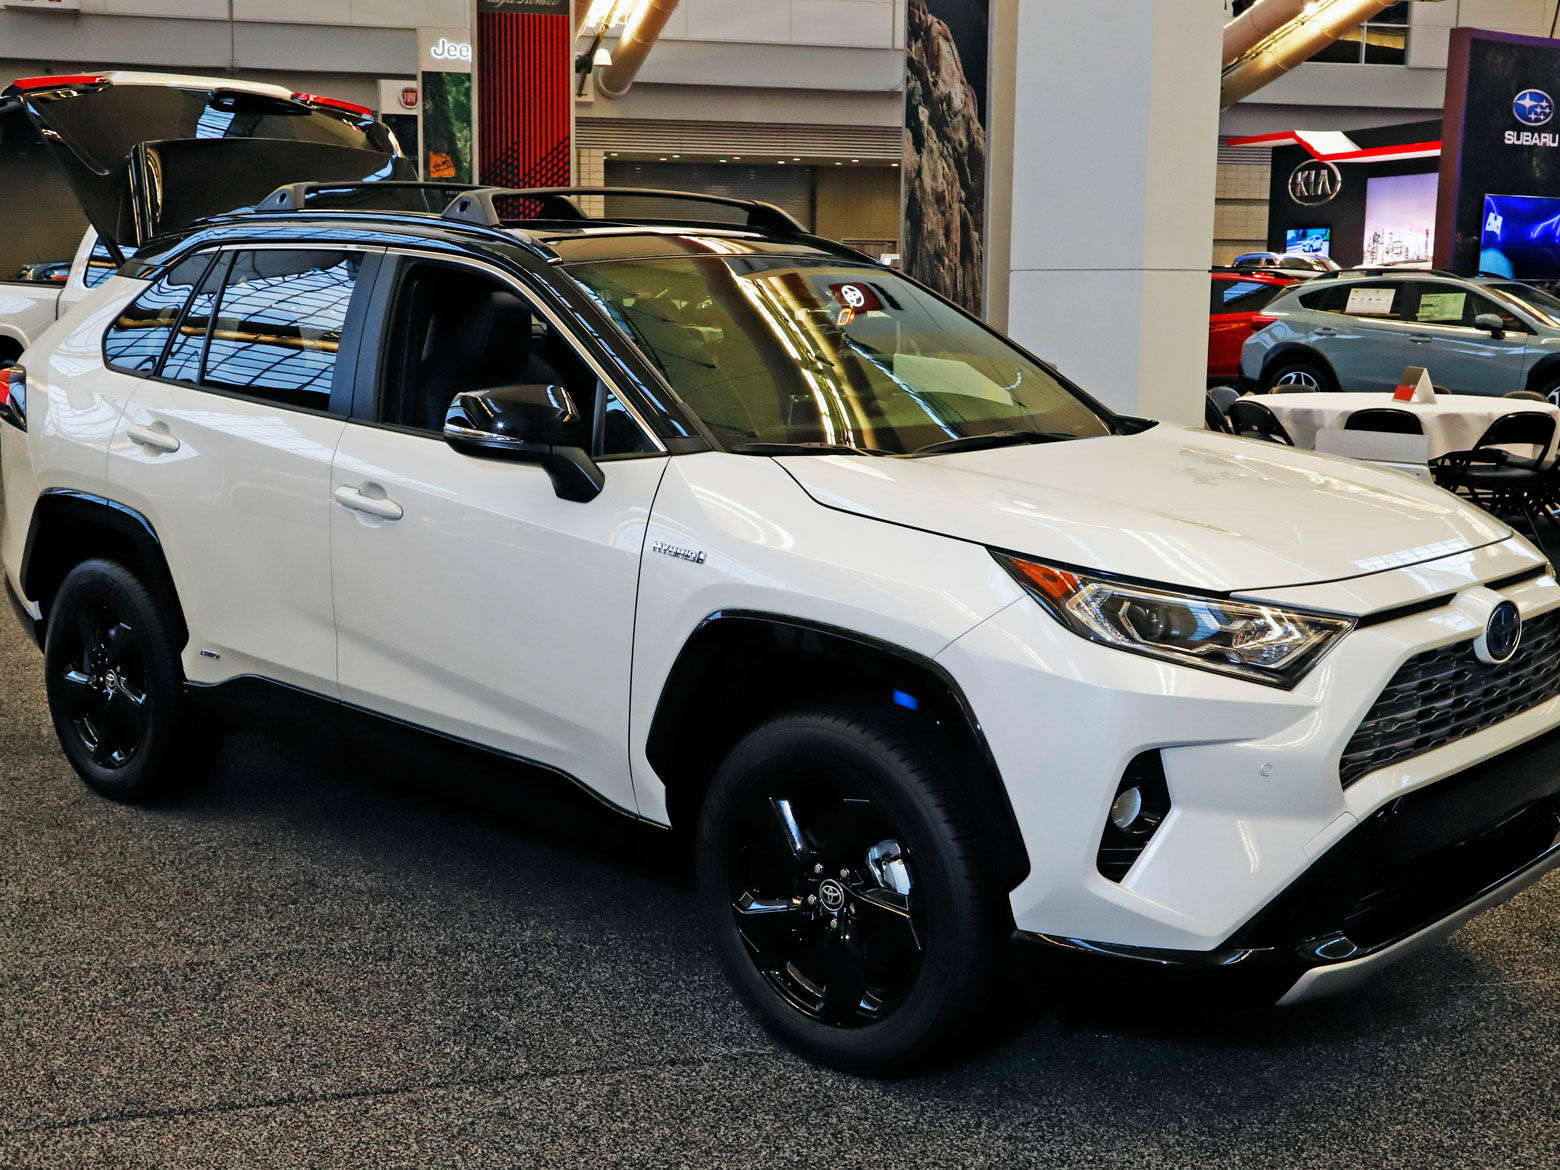 <h3><strong>2020 Toyota RAV4</strong></h3>
<p><strong>Lease Deal: As low as $209 per month for 36 months with $2,999 due at signing</strong></p>
<p>In some regions, Toyota is offering a fantastic lease deal on one of the most popular SUVs in the marketplace. The <a href="https://cars.usnews.com/cars-trucks/toyota/rav4">2020 Toyota RAV4</a> lease deal applies to the LE model with all-wheel drive, and has a cap of 30,000 miles over the three-year lease term. This mileage limit is lower than what many lease offers provide.</p>
<p>The RAV4 comes loaded with standard safety and driver assistance technologies. Its Toyota Safety Sense package includes automatic emergency braking, adaptive cruise control, automatic high-beam headlights, and lane tracing assist, which helps keep you centered in the lane when using cruise control. It’s a 2020 Insurance Institute for Highway Safety <a href="https://cars.usnews.com/cars-trucks/iihs-top-safety-pick">Top Safety Pick</a>.</p>
